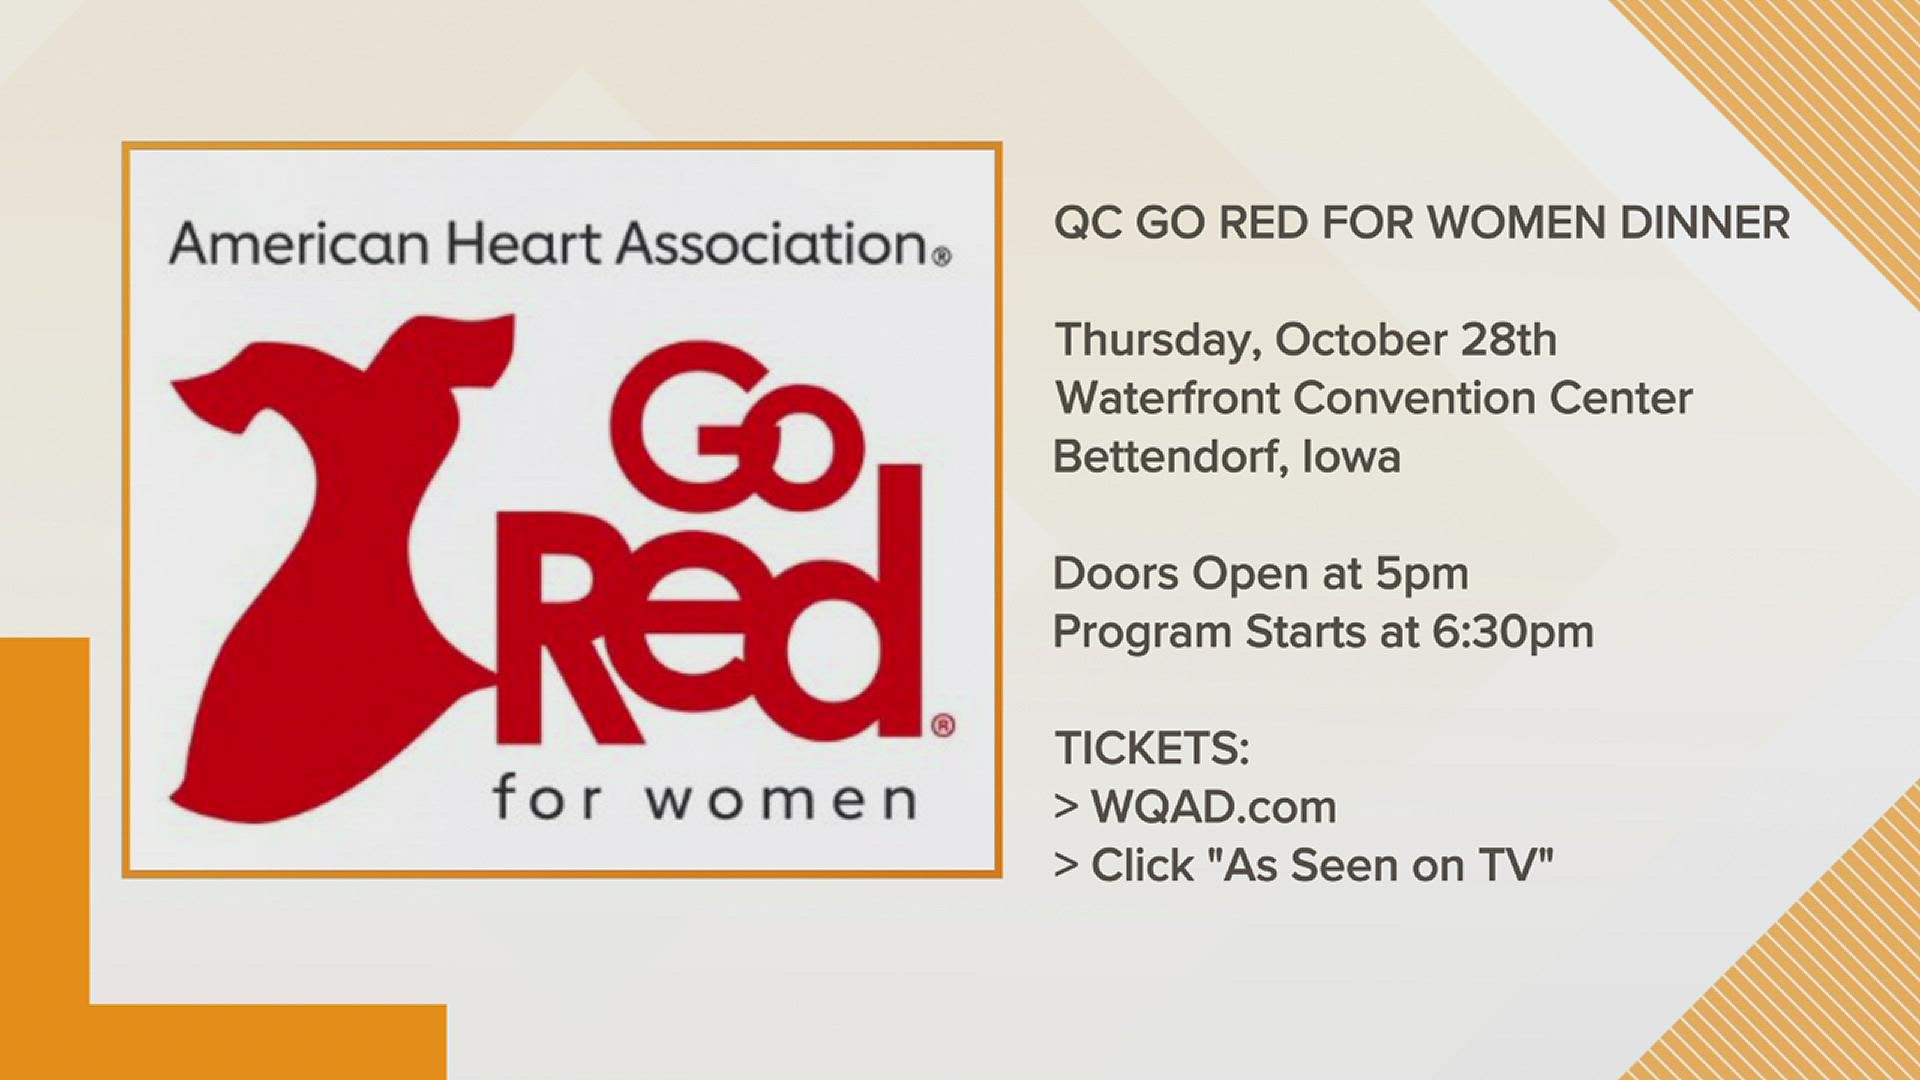 The Quad Cities Go Red for Women Dinner, benefitting the American Heart Association, takes place October 28, 2021